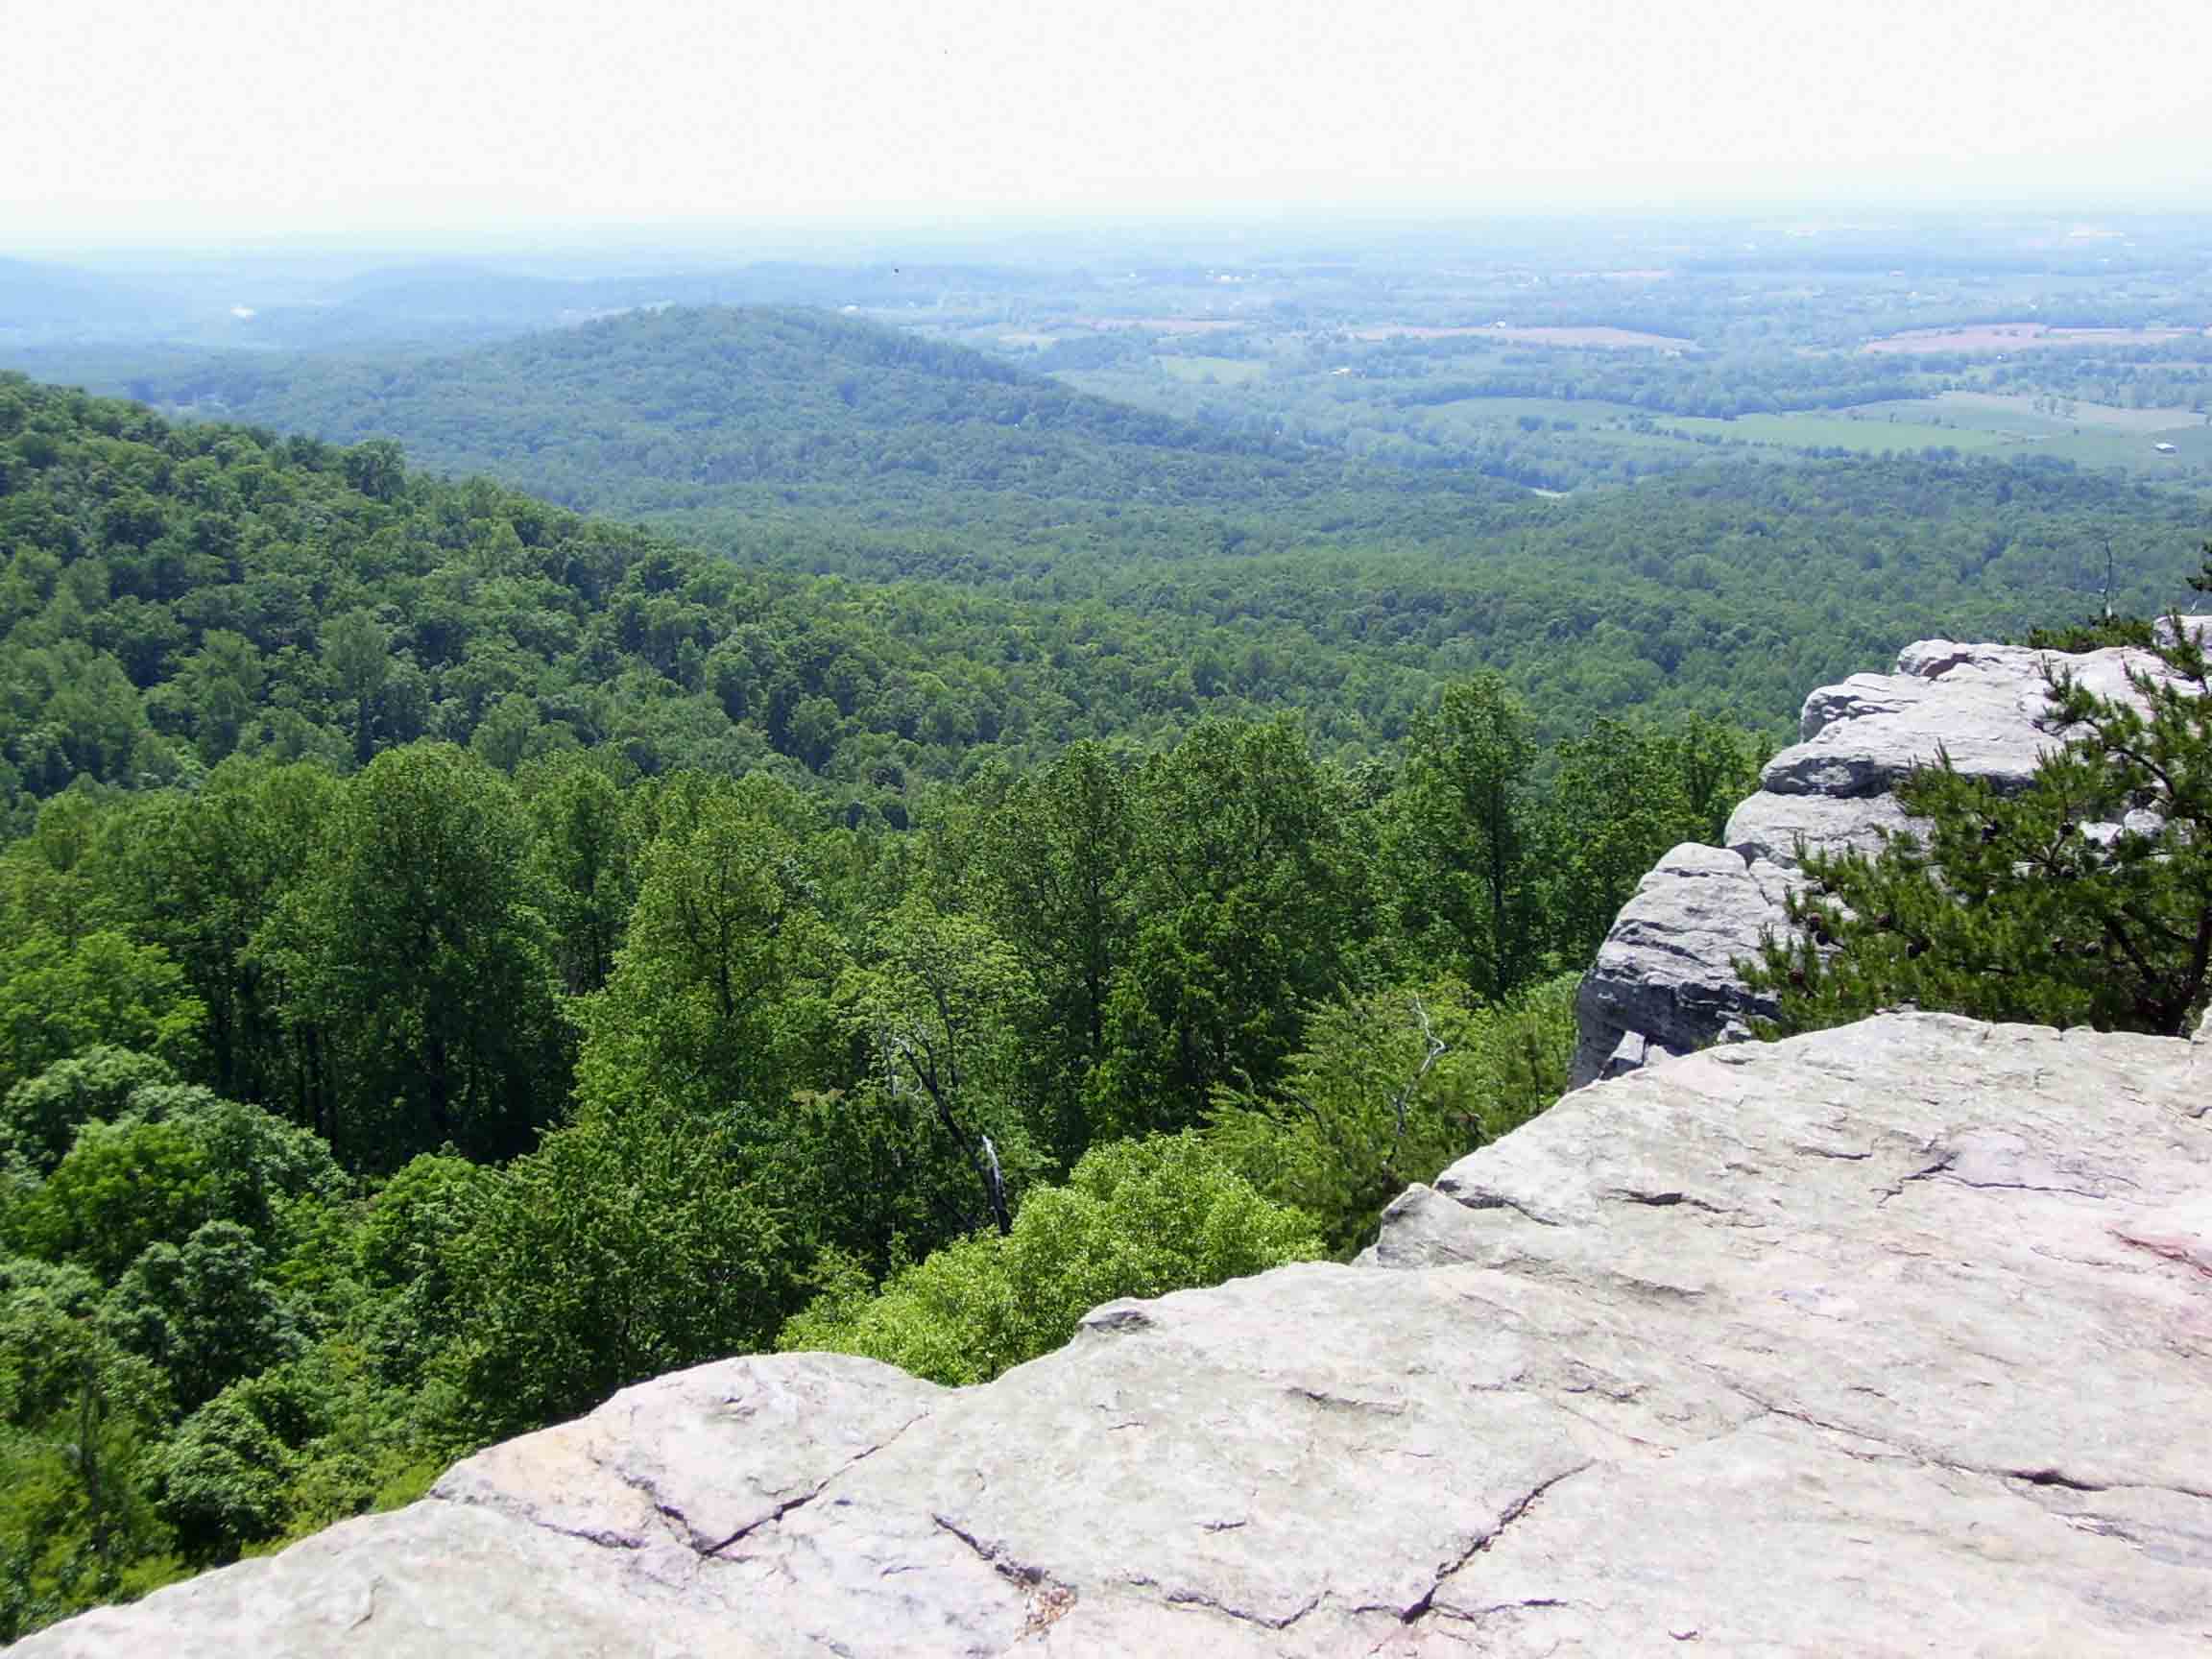 View to the west from Crescent Rock (Mile 10.9). Courtesy dlcul@conncoll.edu